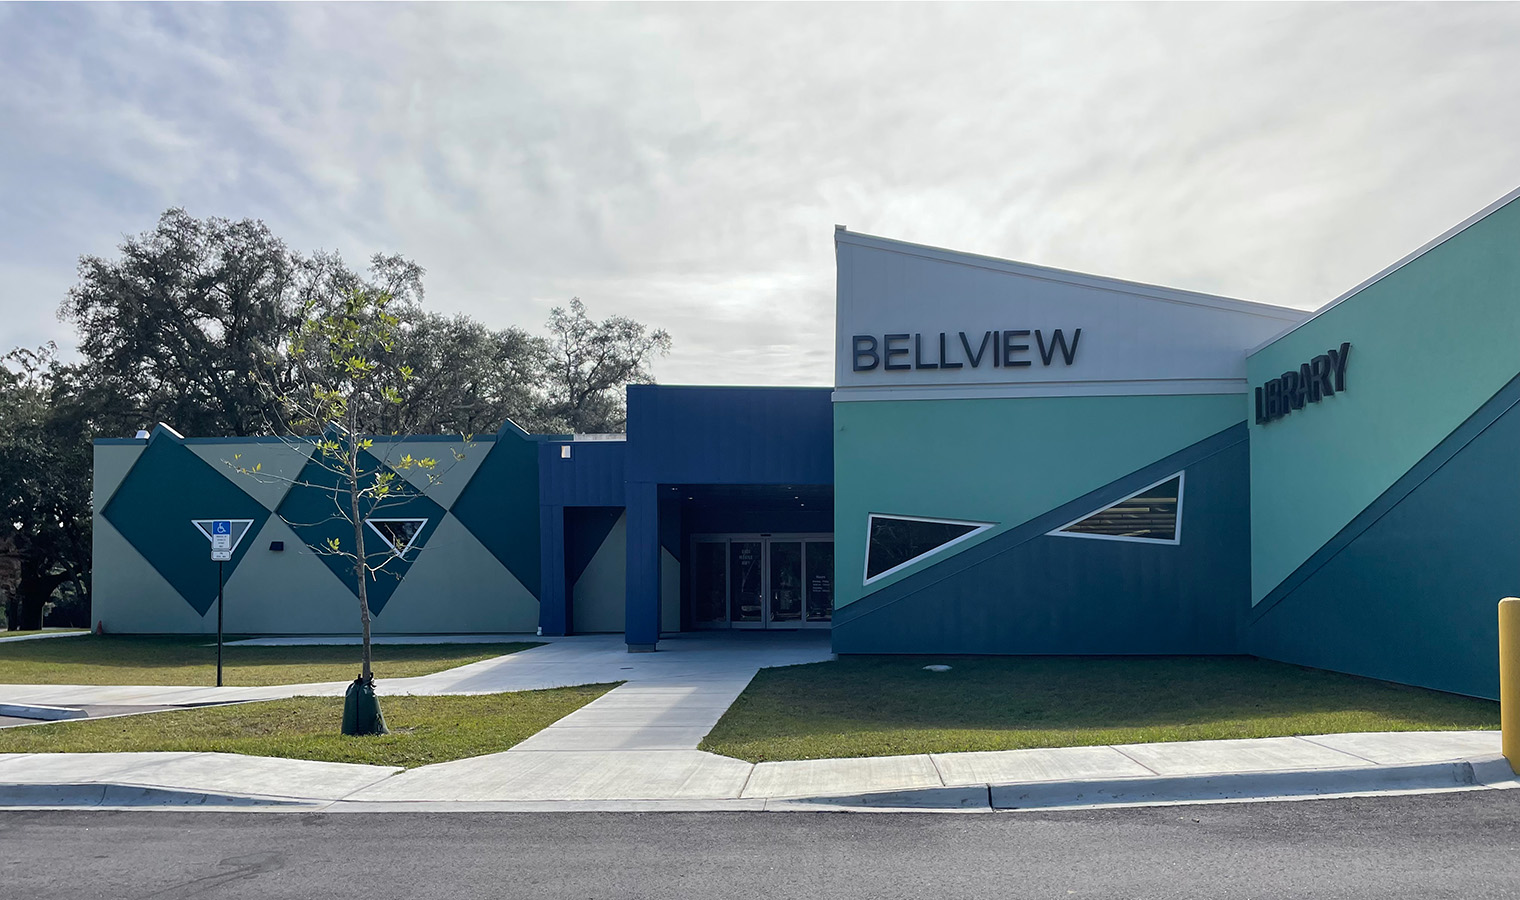 Bellview Library Teaser Image